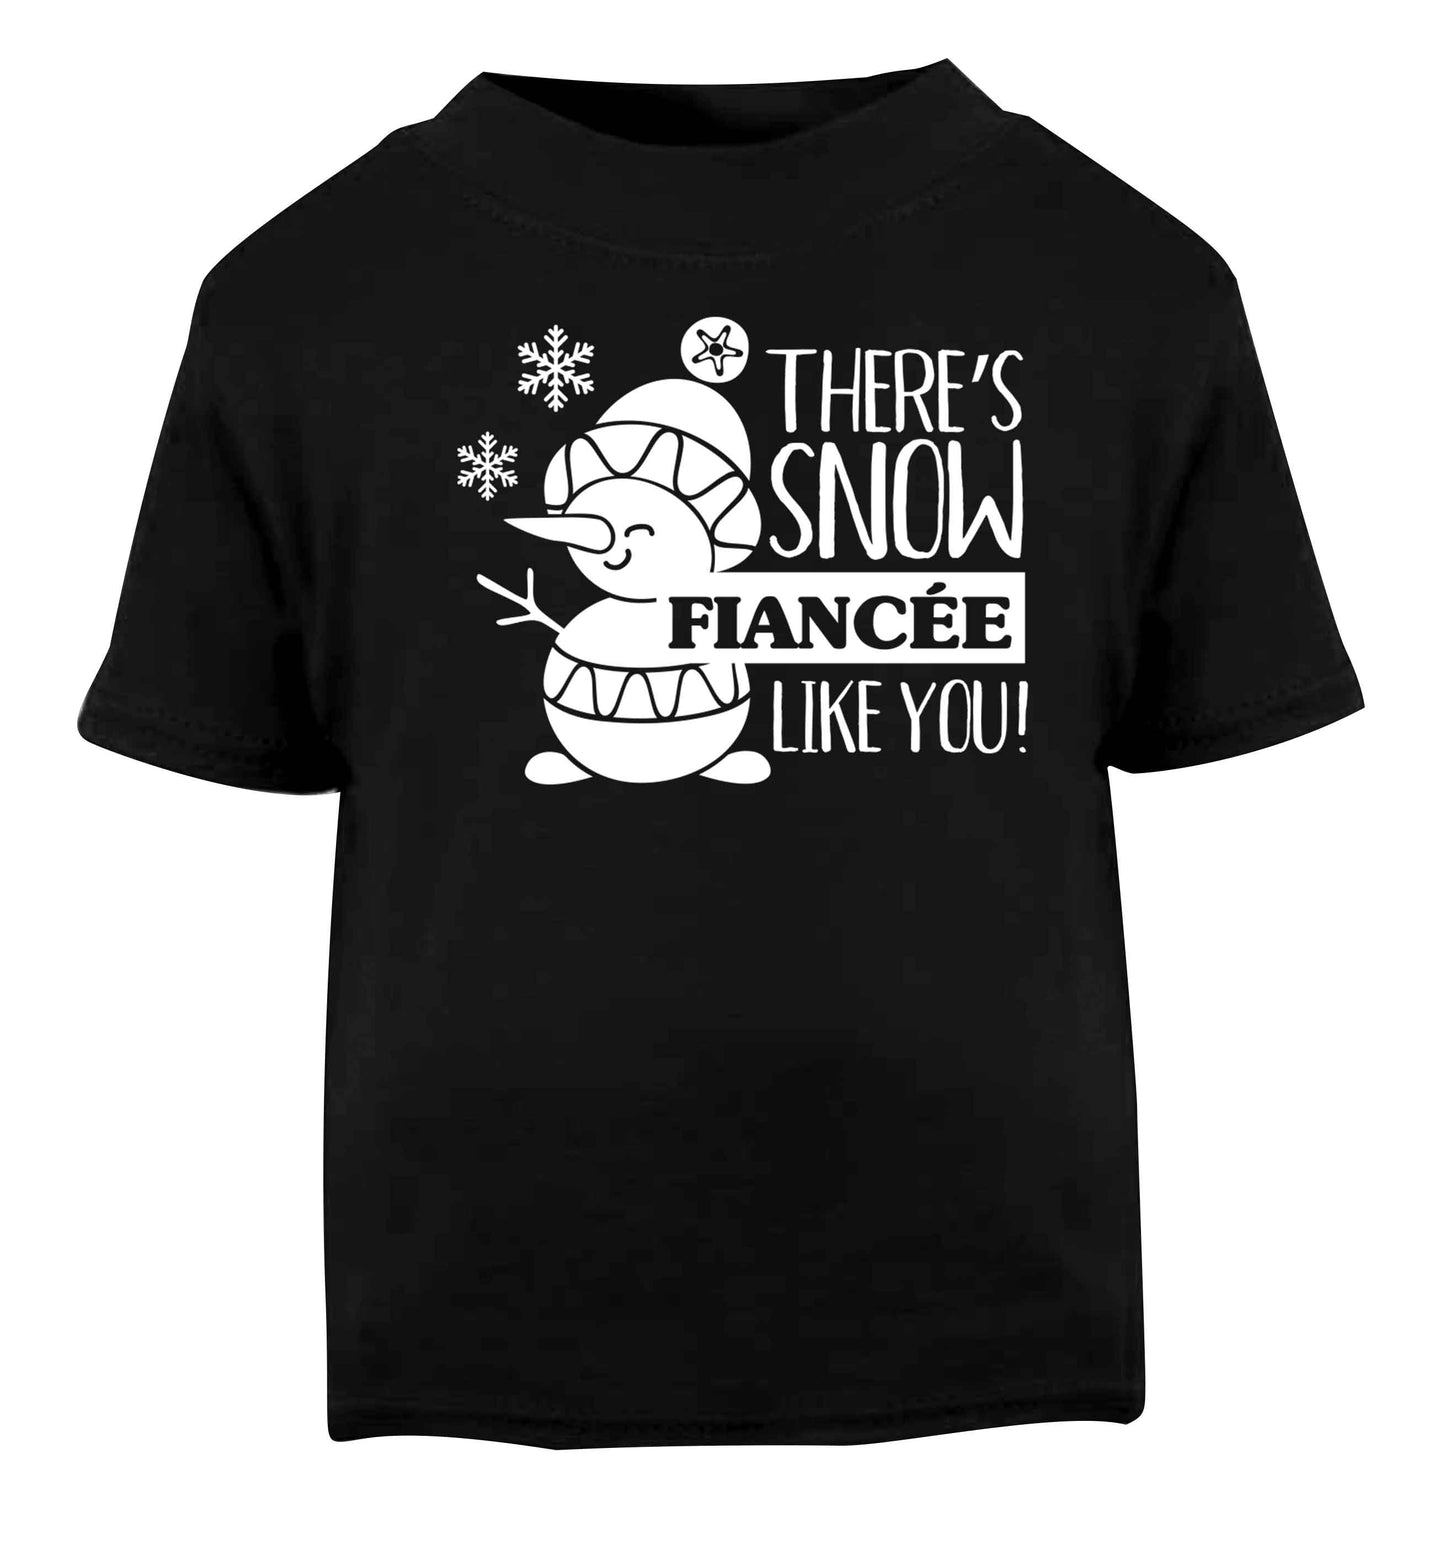 There's snow fiancee like you Black baby toddler Tshirt 2 years